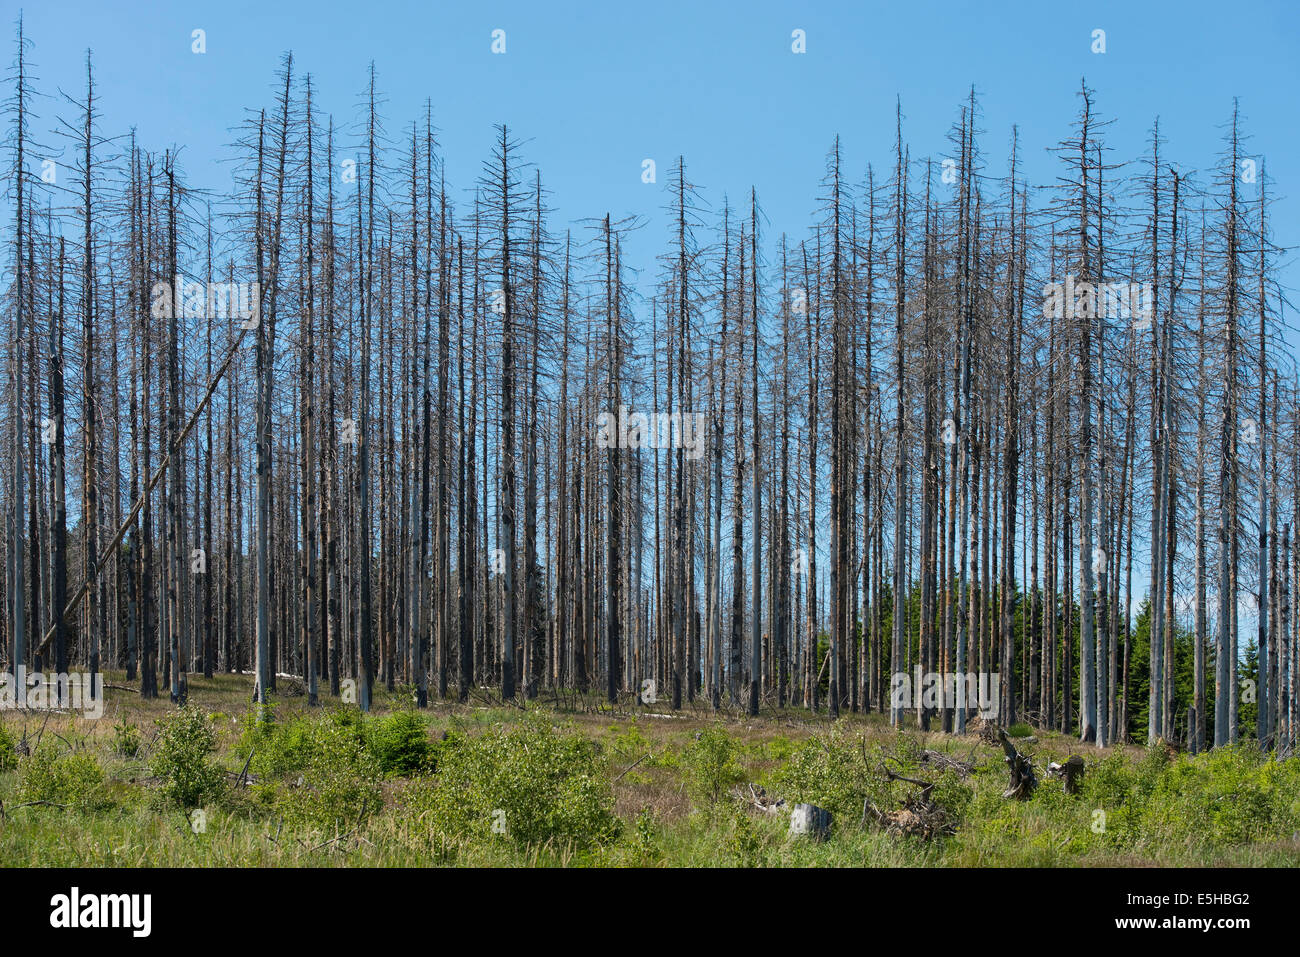 Dead Spruce Picea Abies Infected And Damaged By The European Spruce Bark Beetle Ips Typographus Harz National Park Stock Photo Alamy